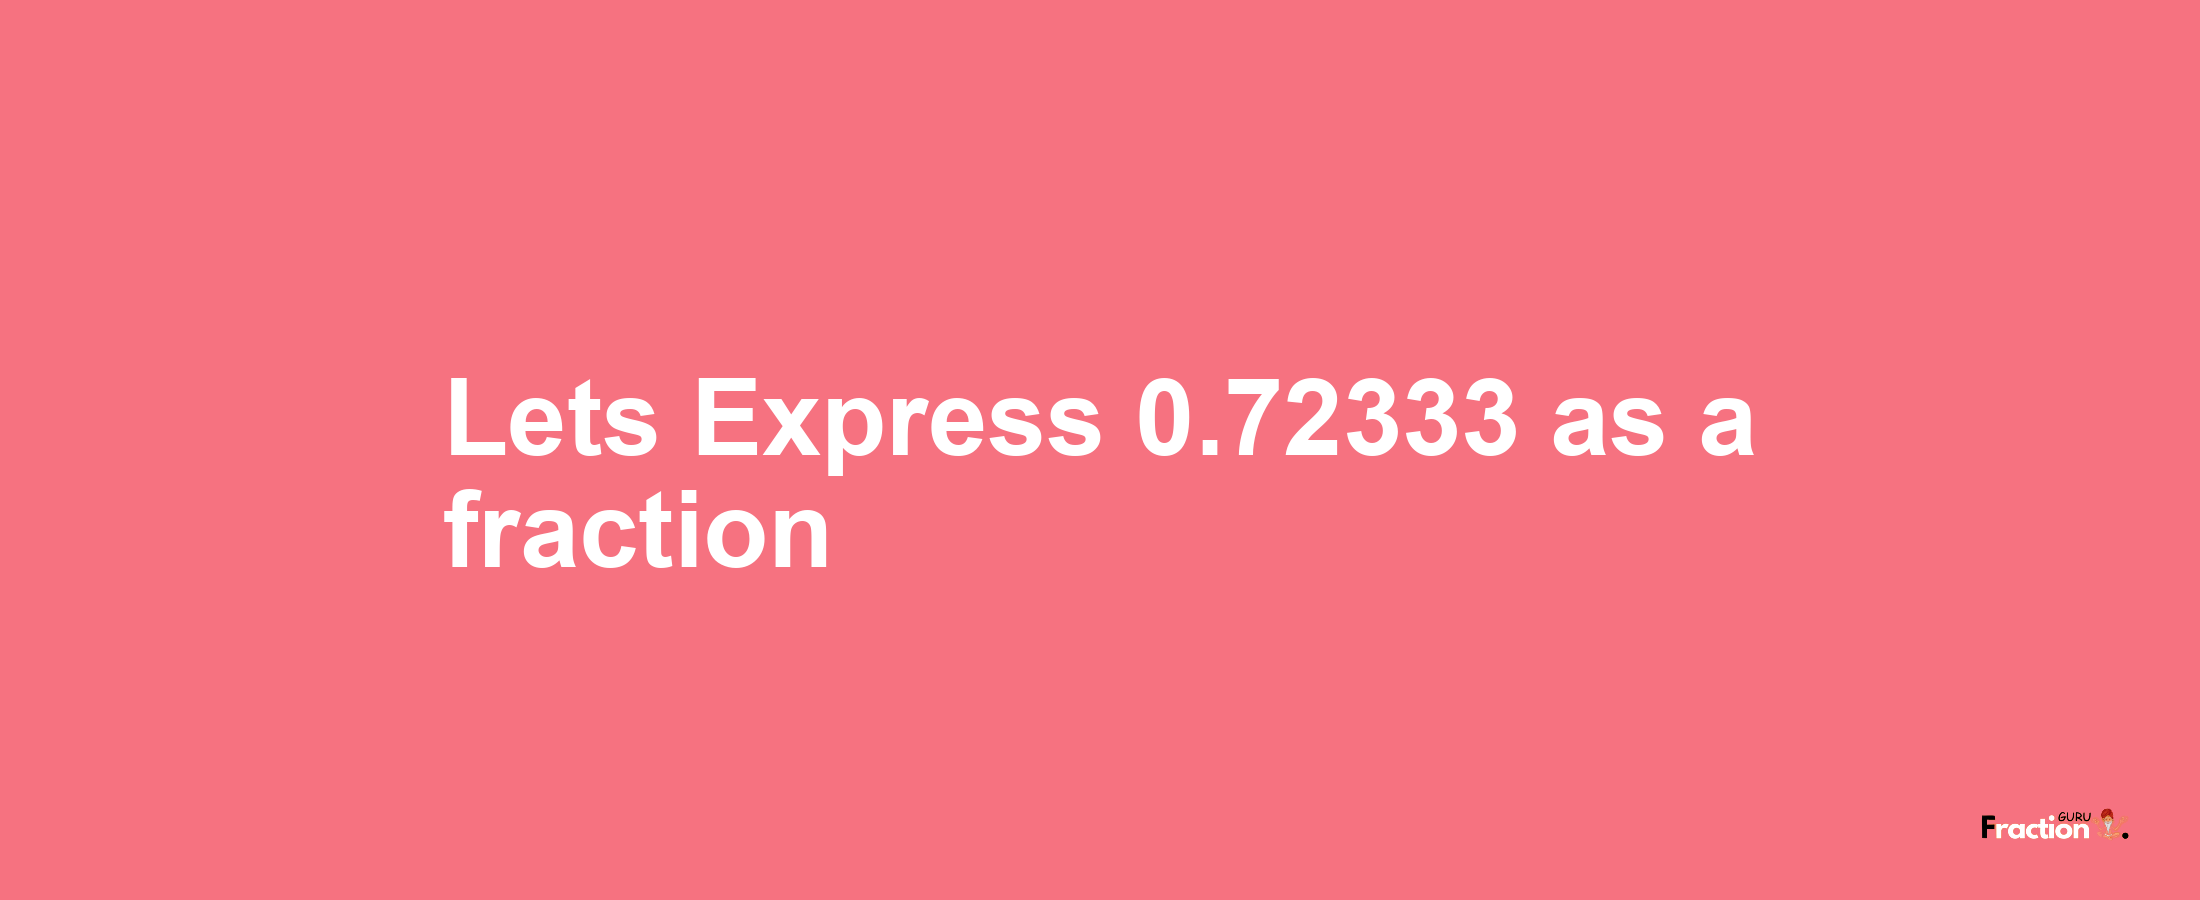 Lets Express 0.72333 as afraction